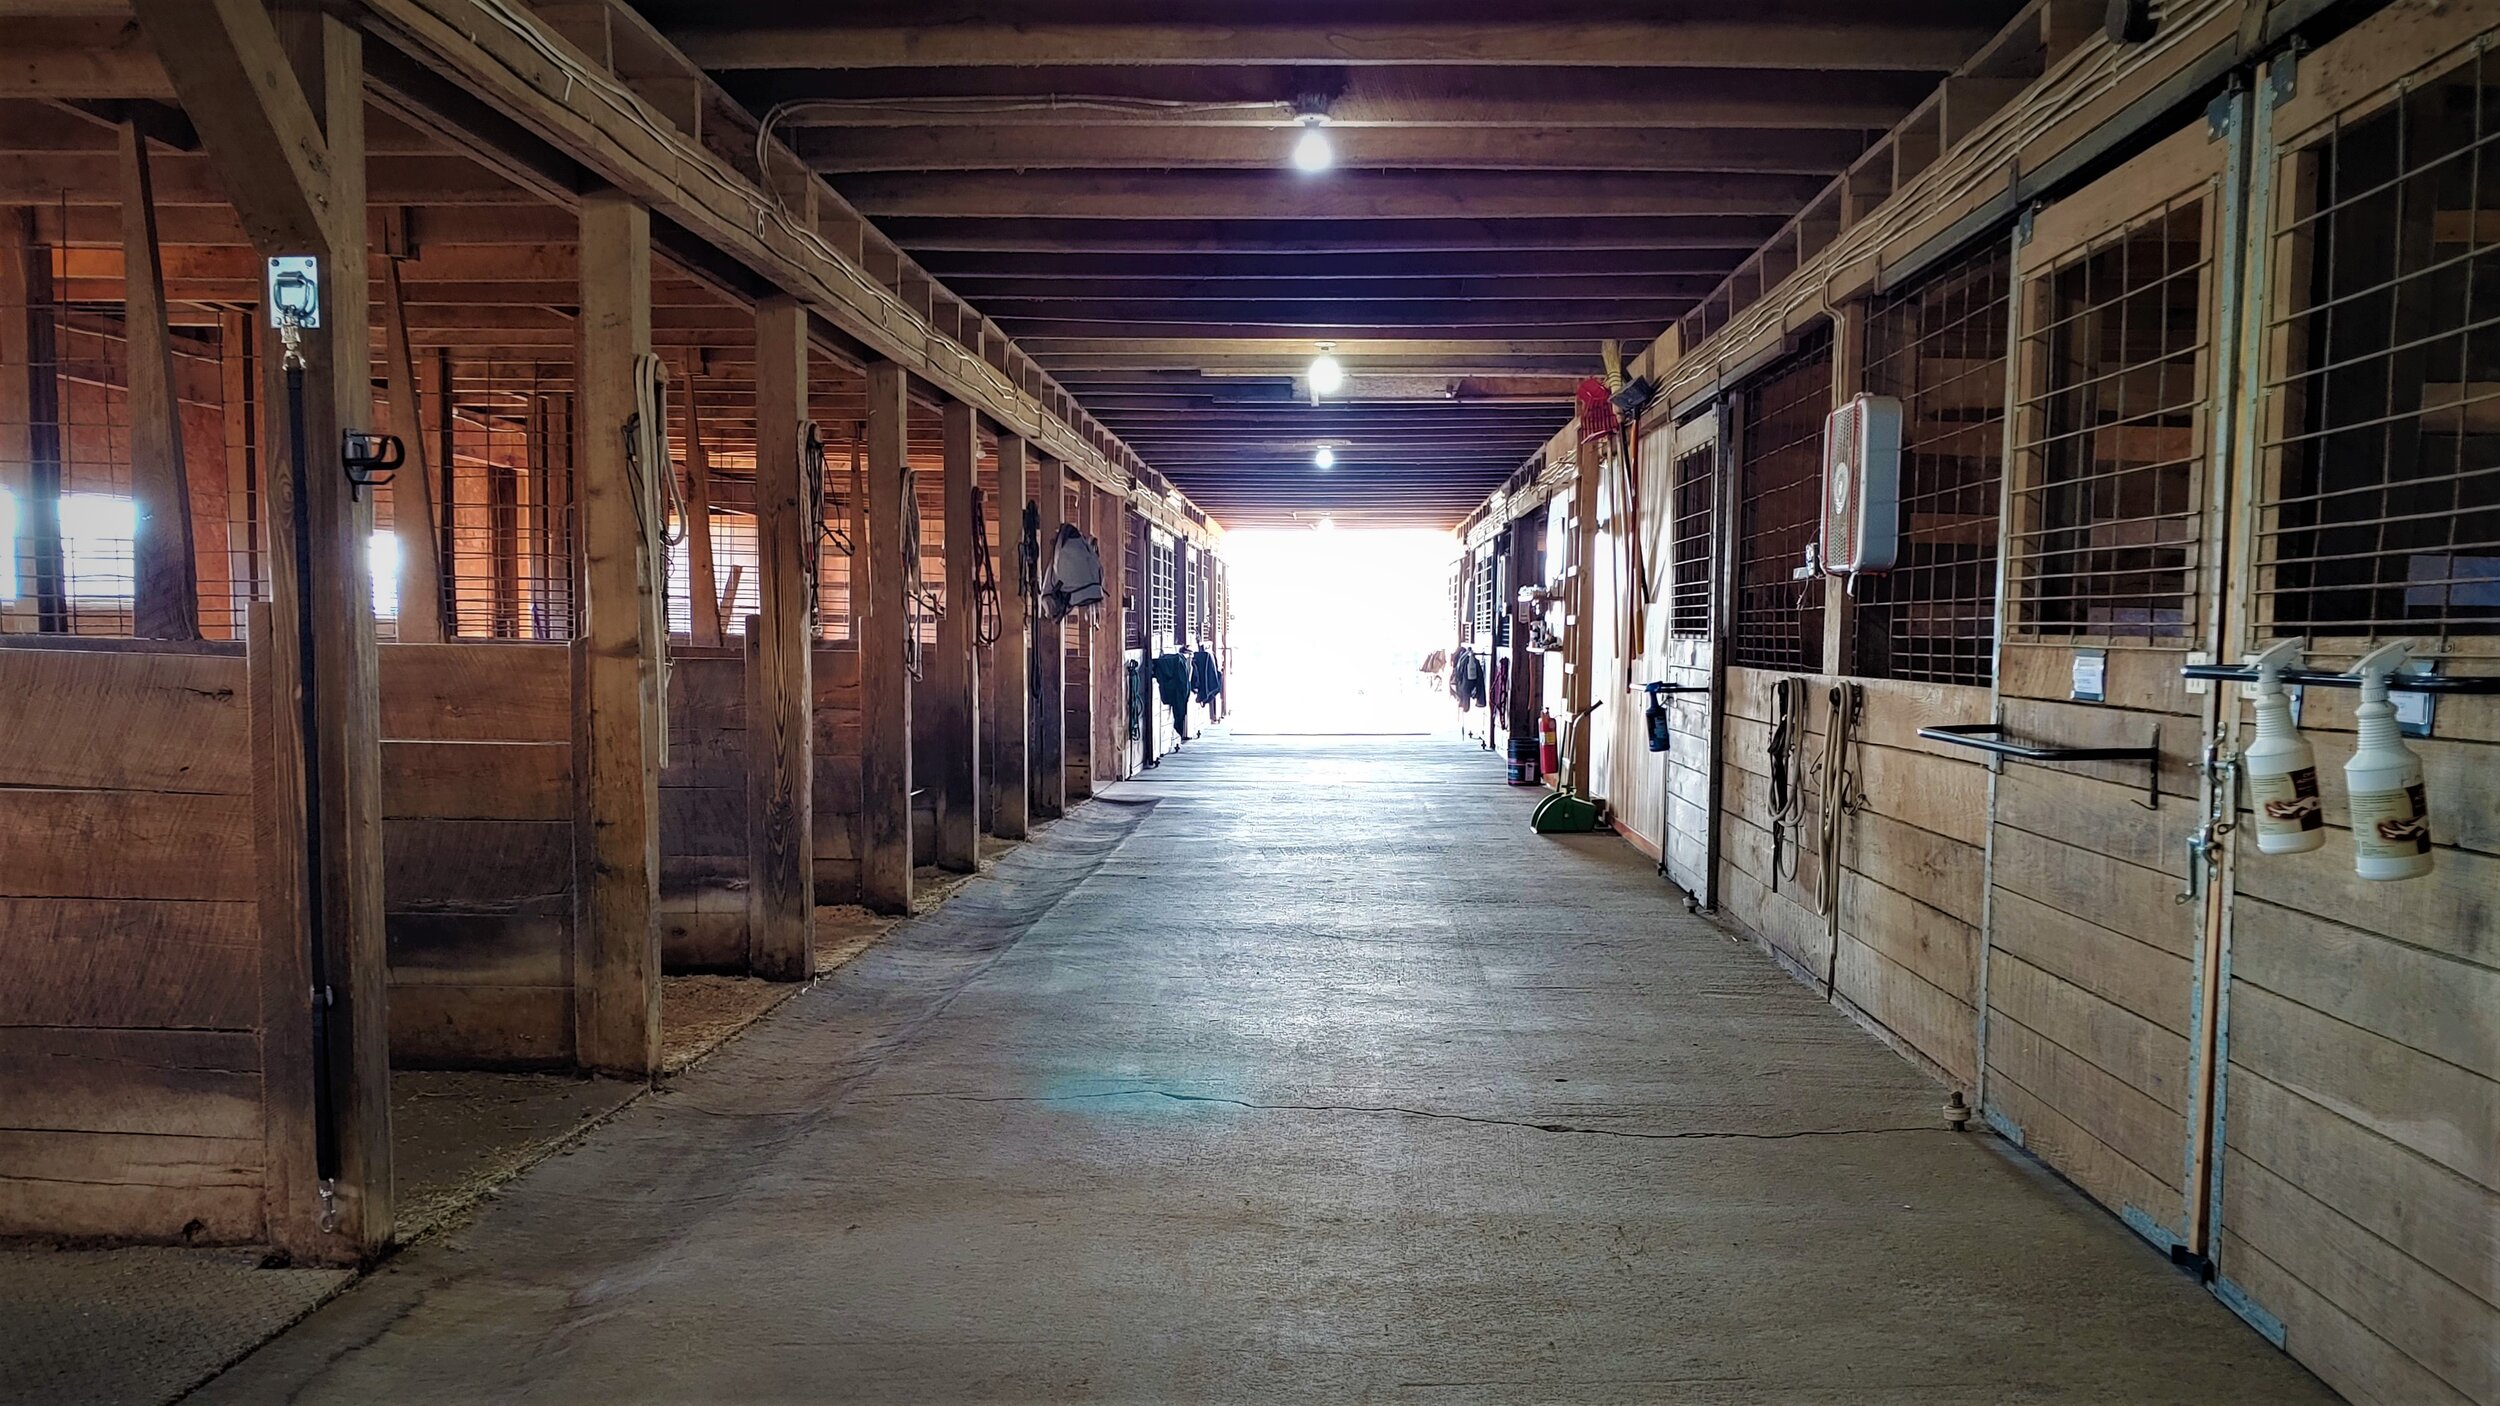 horse stable tours near me